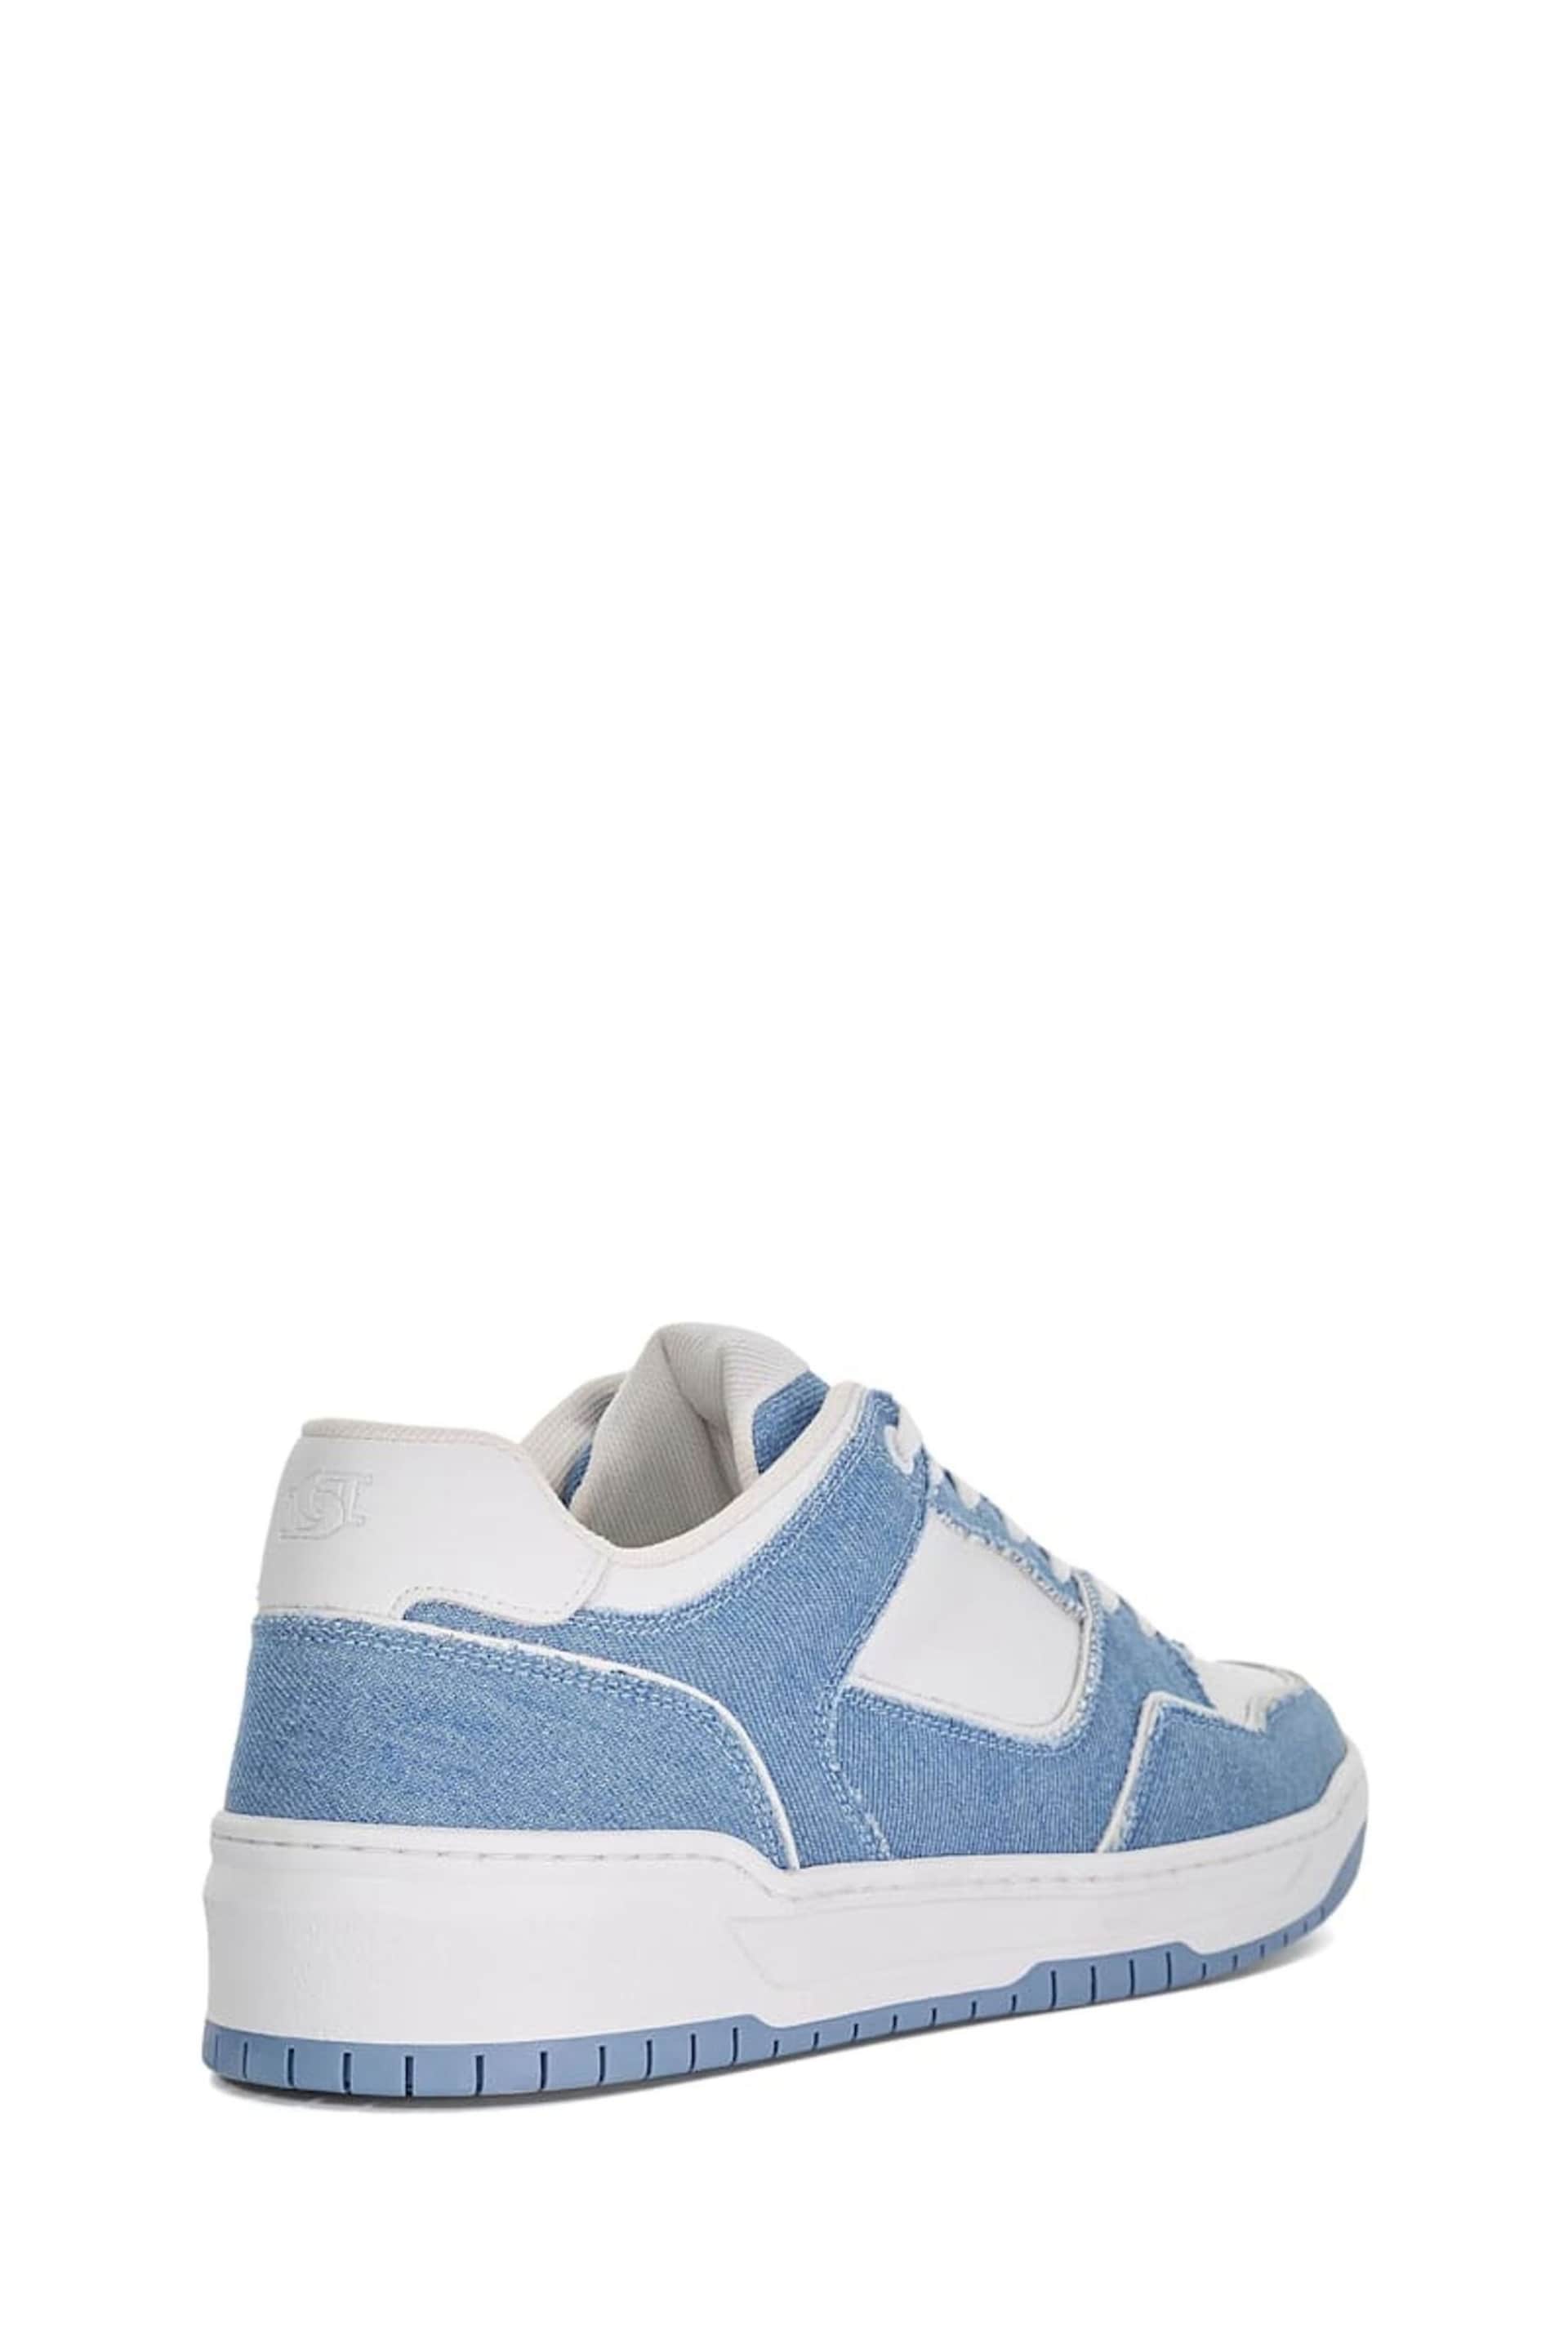 Dune London Blue Tainted Chunky Court Trainers - Image 3 of 6